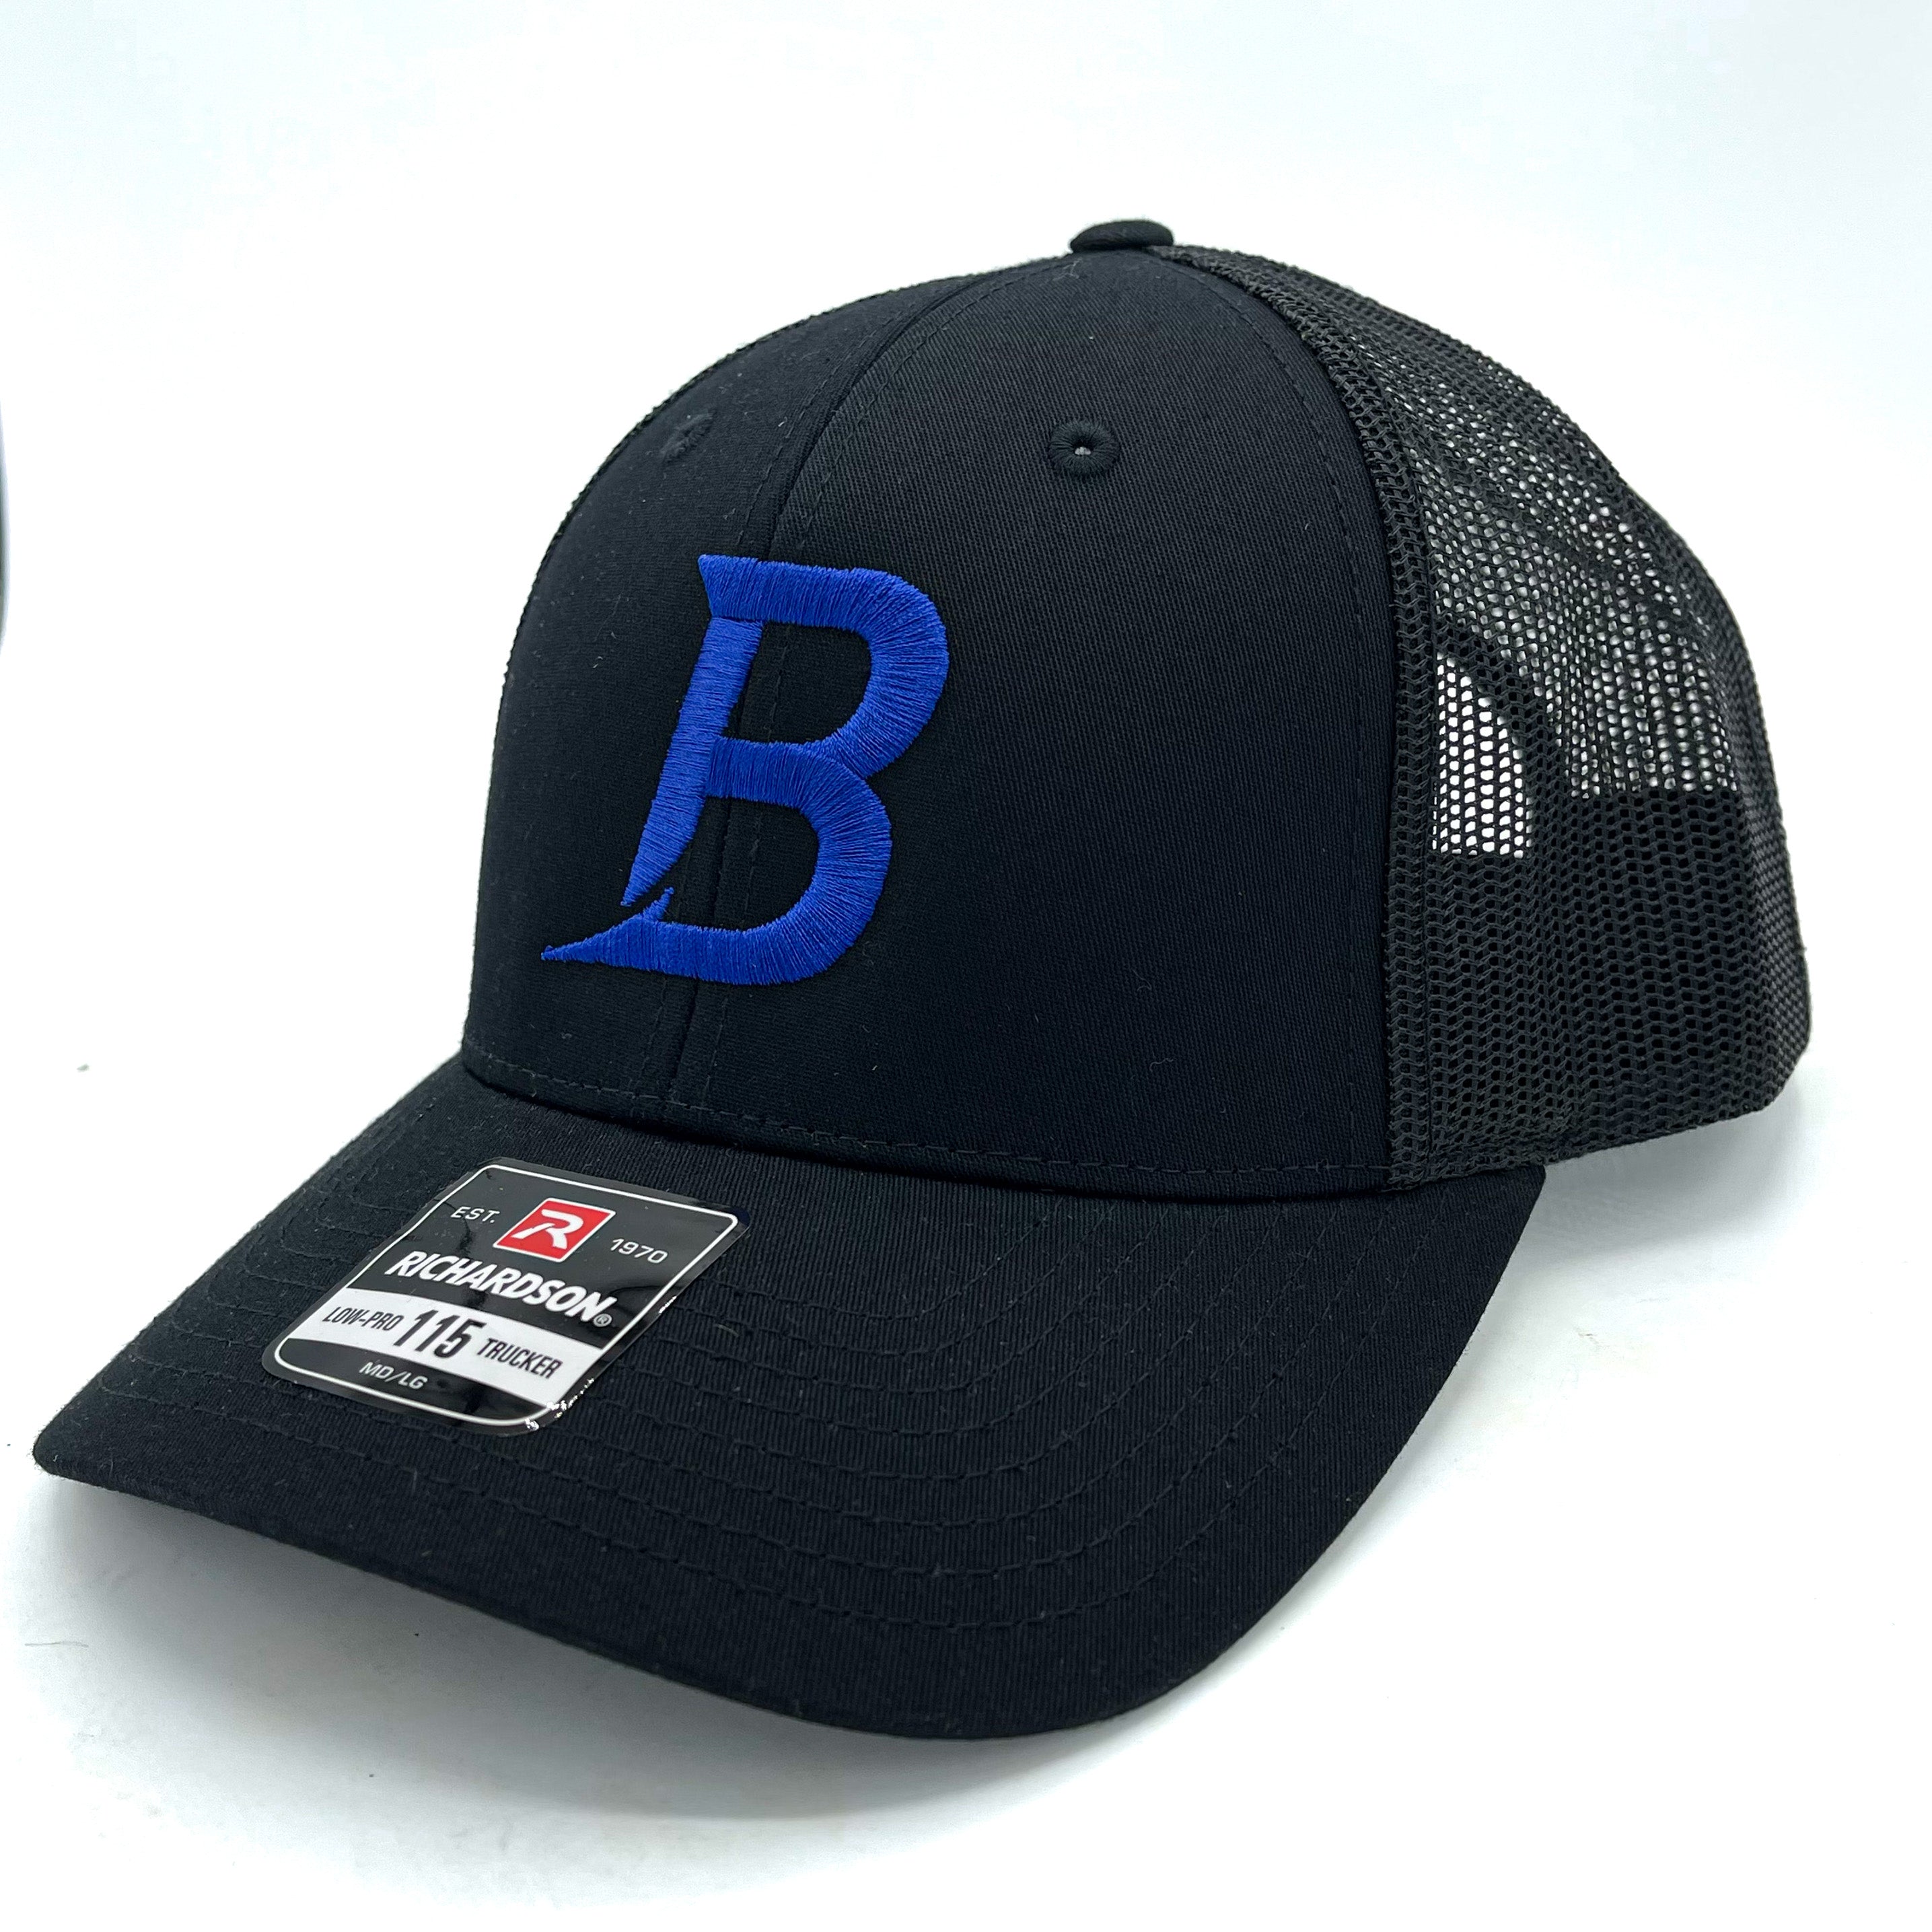 Solid Black Bizz Snap Embroidered “B”